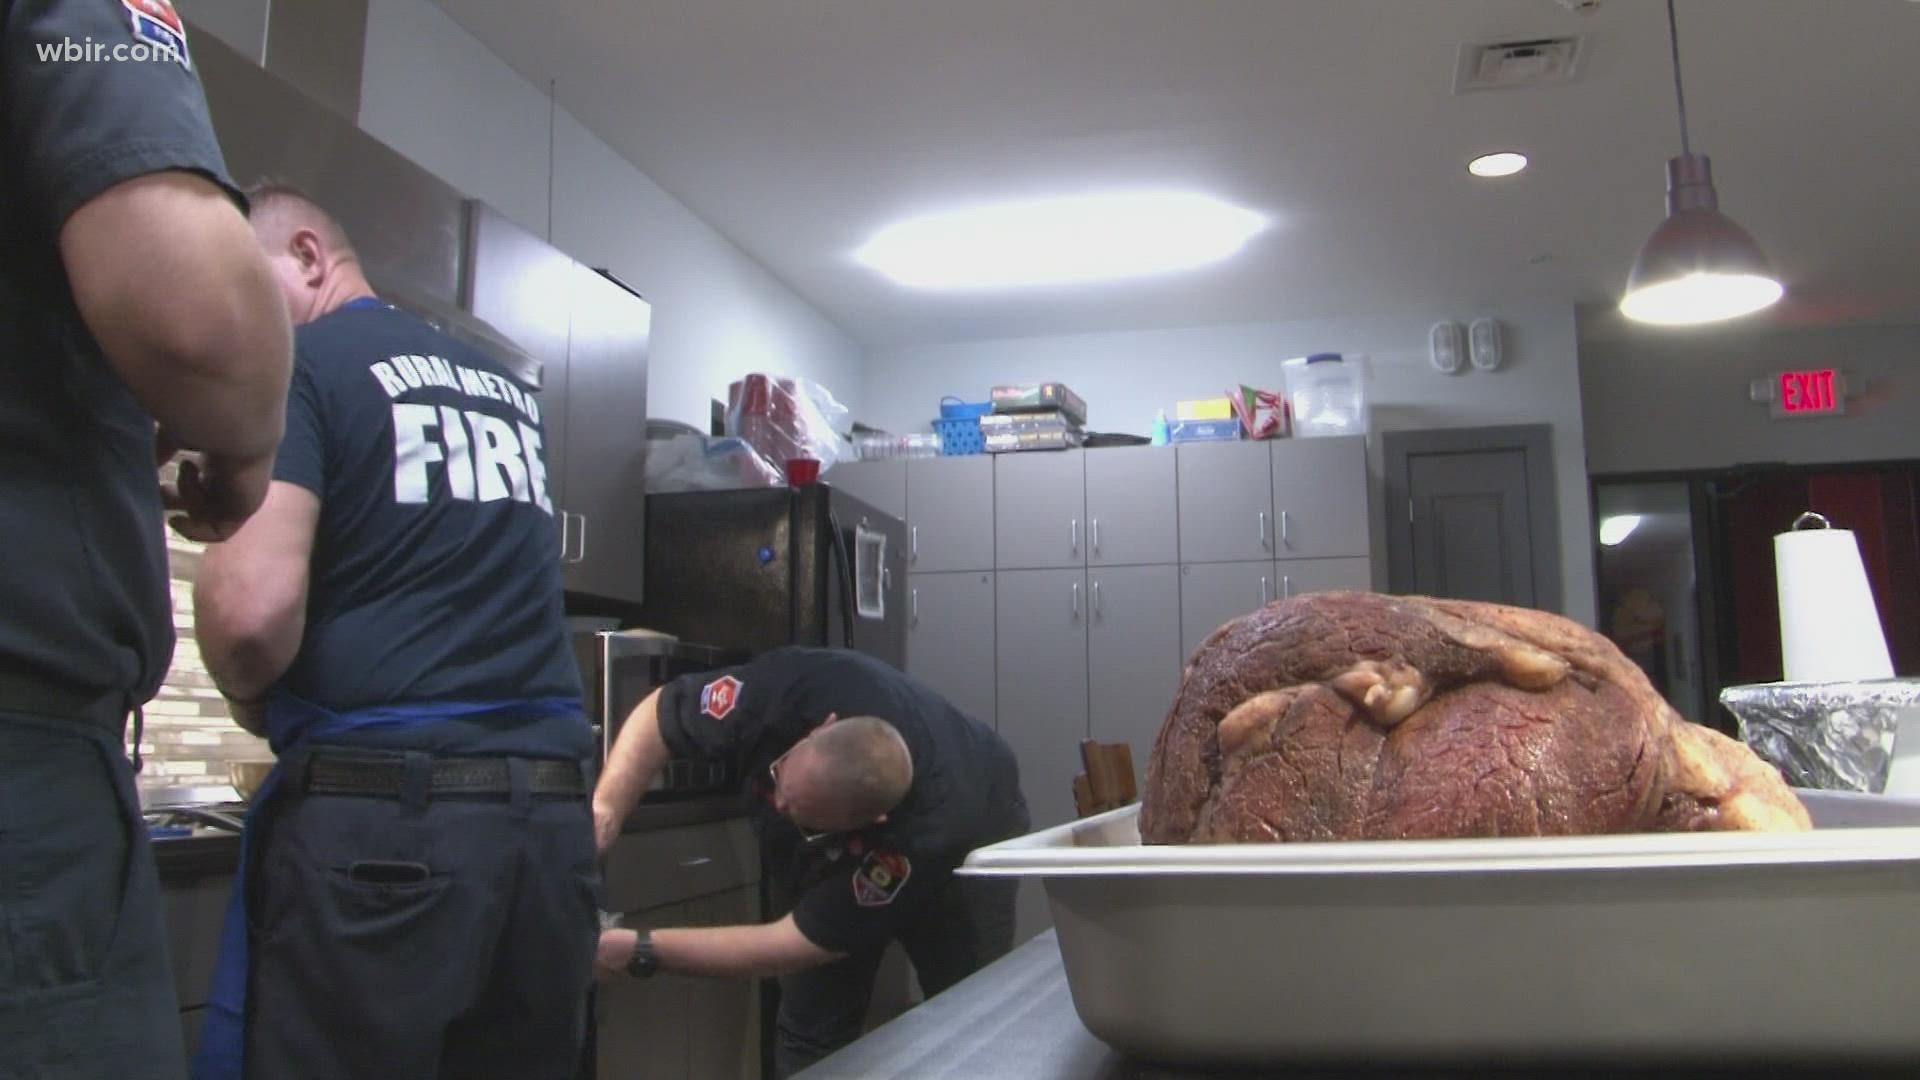 Firefighters at Rural Metro Fire Station 36 prepared some of the best-looking food this holiday season.